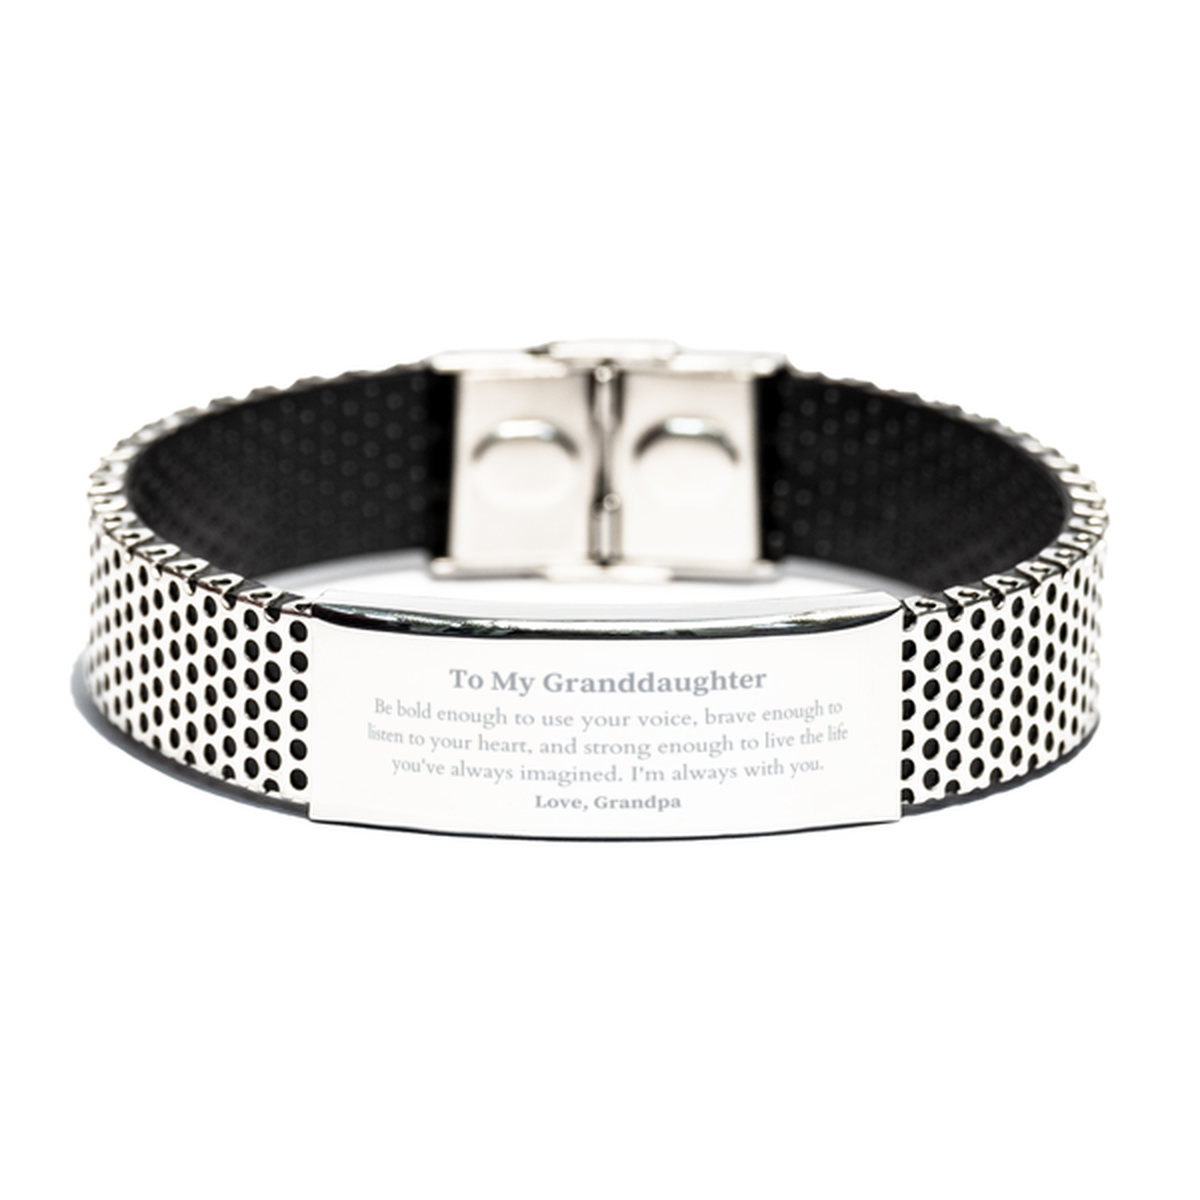 Keepsake Granddaughter Stainless Steel Bracelet Gift Idea Graduation Christmas Birthday Granddaughter from Grandpa, Granddaughter Be bold enough to use your voice, brave enough to listen to your heart. Love, Grandpa